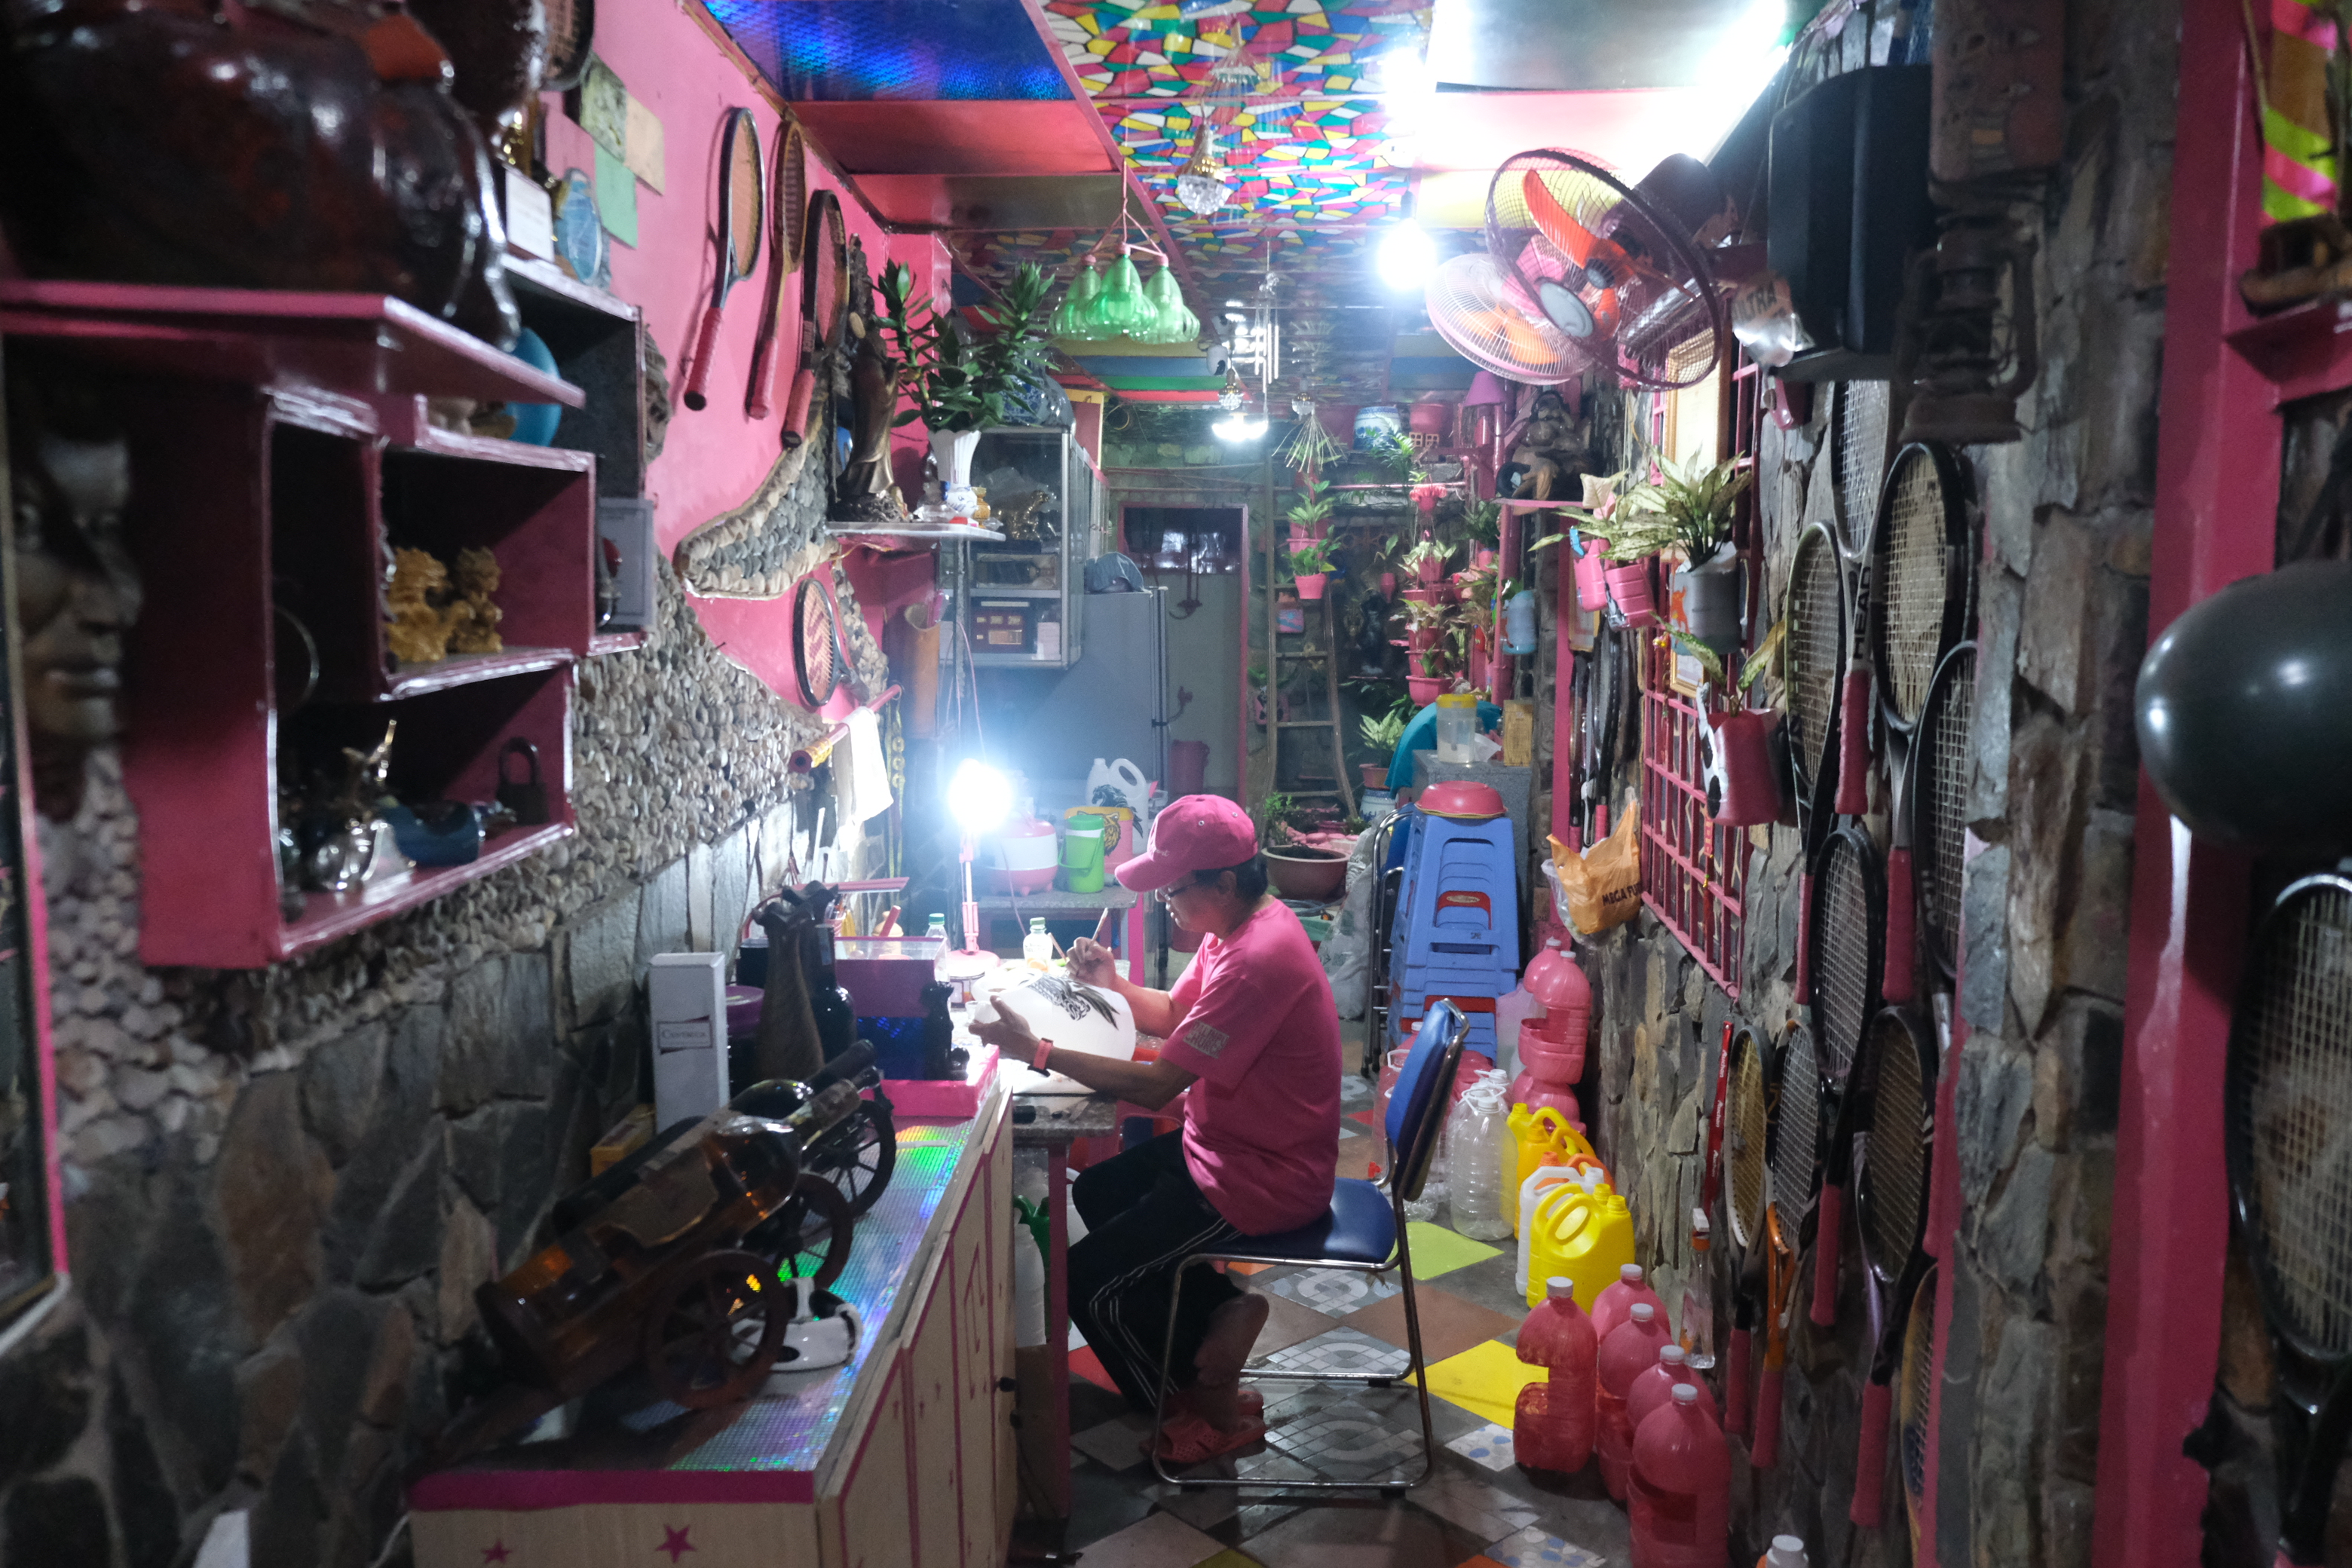 Chanh works on a discarded plastic bottle in his house which is home to many pink items. Photo: Ngoc Phuong / Tuoi Tre News